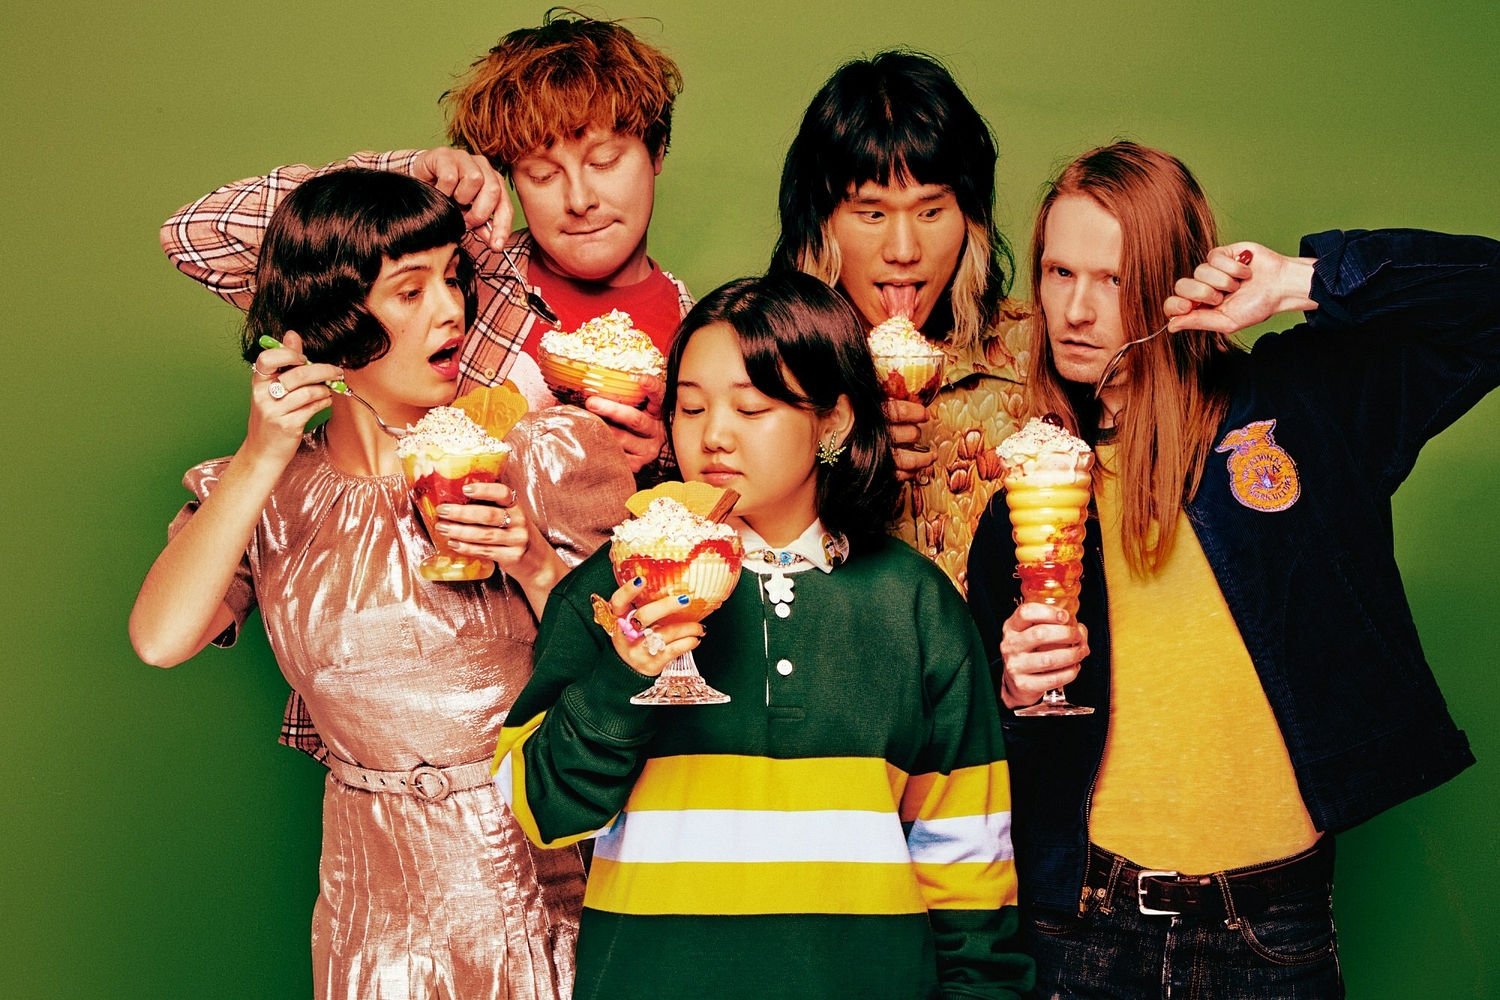 Superorganism: “Our band is an exploration of the grey area”